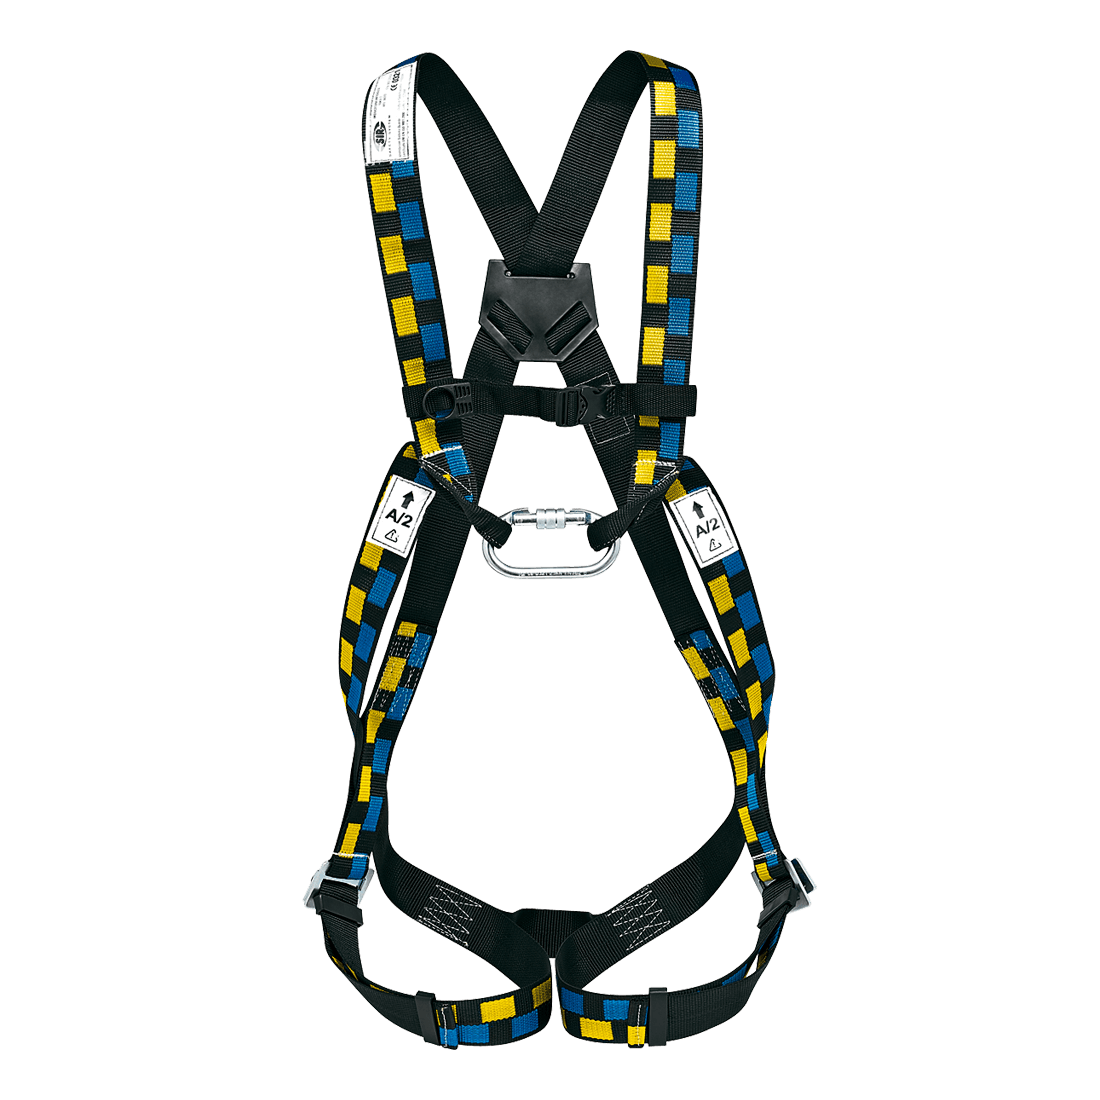 SOKOI 2 SAFETY HARNESS